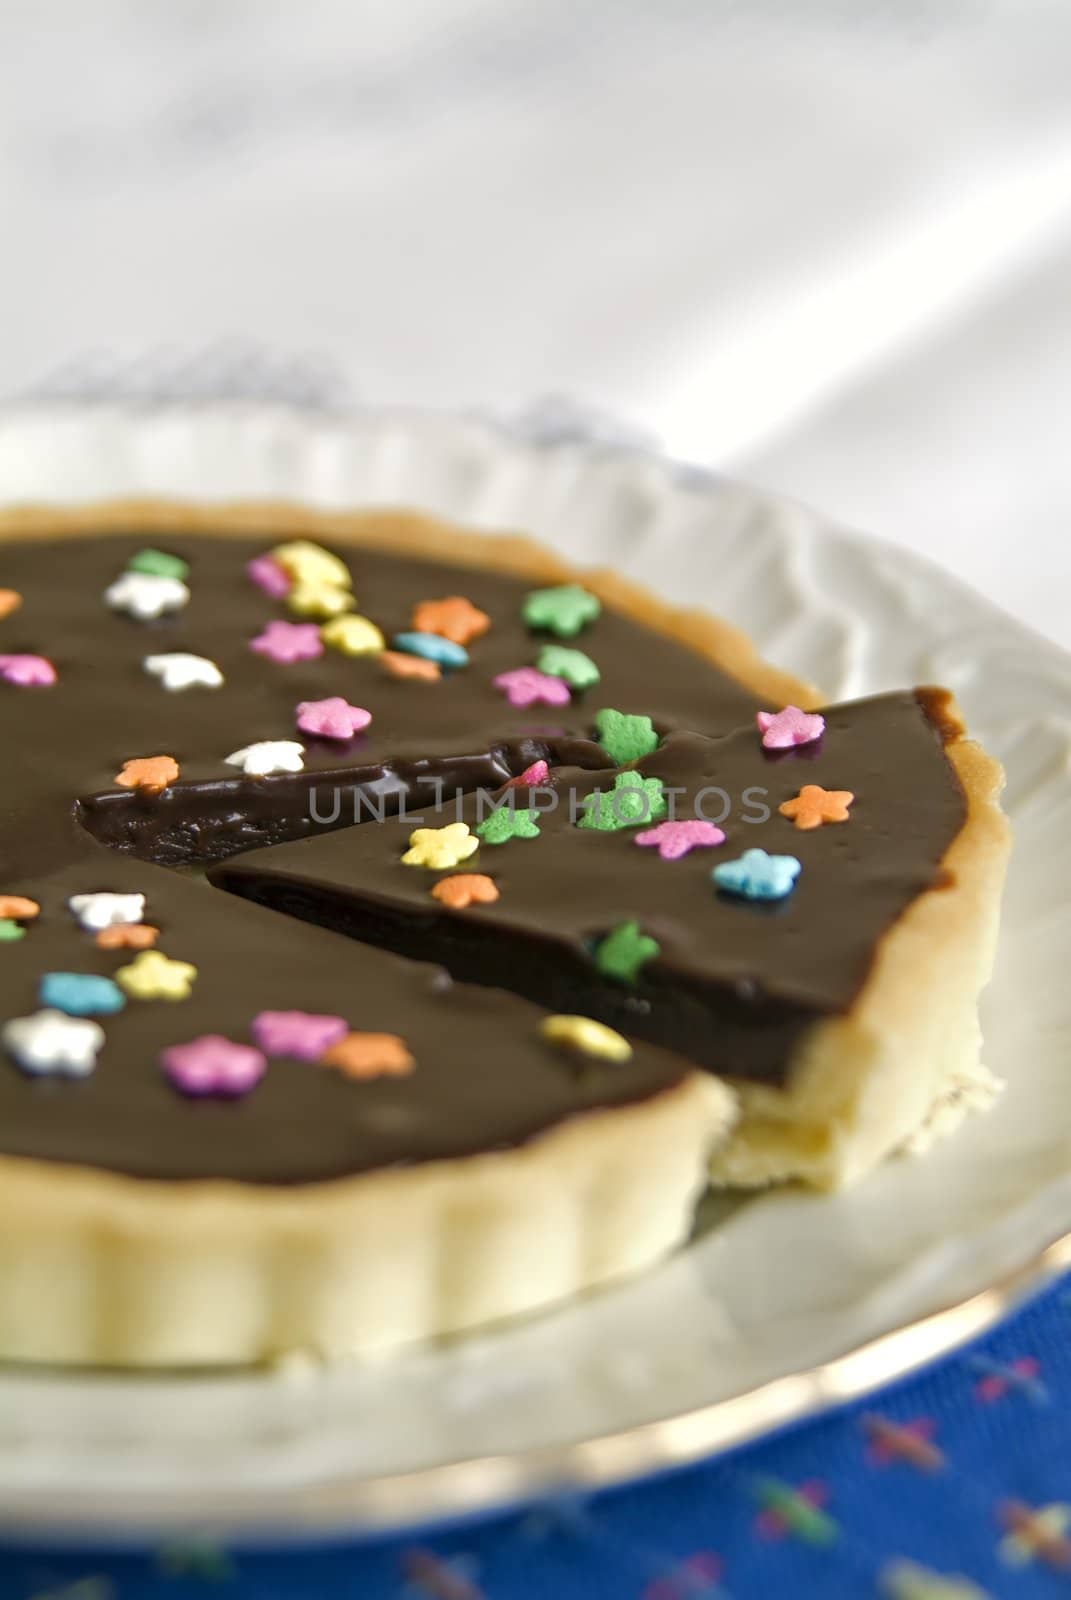 Detail of a Chocolate Tart with colorful star candies